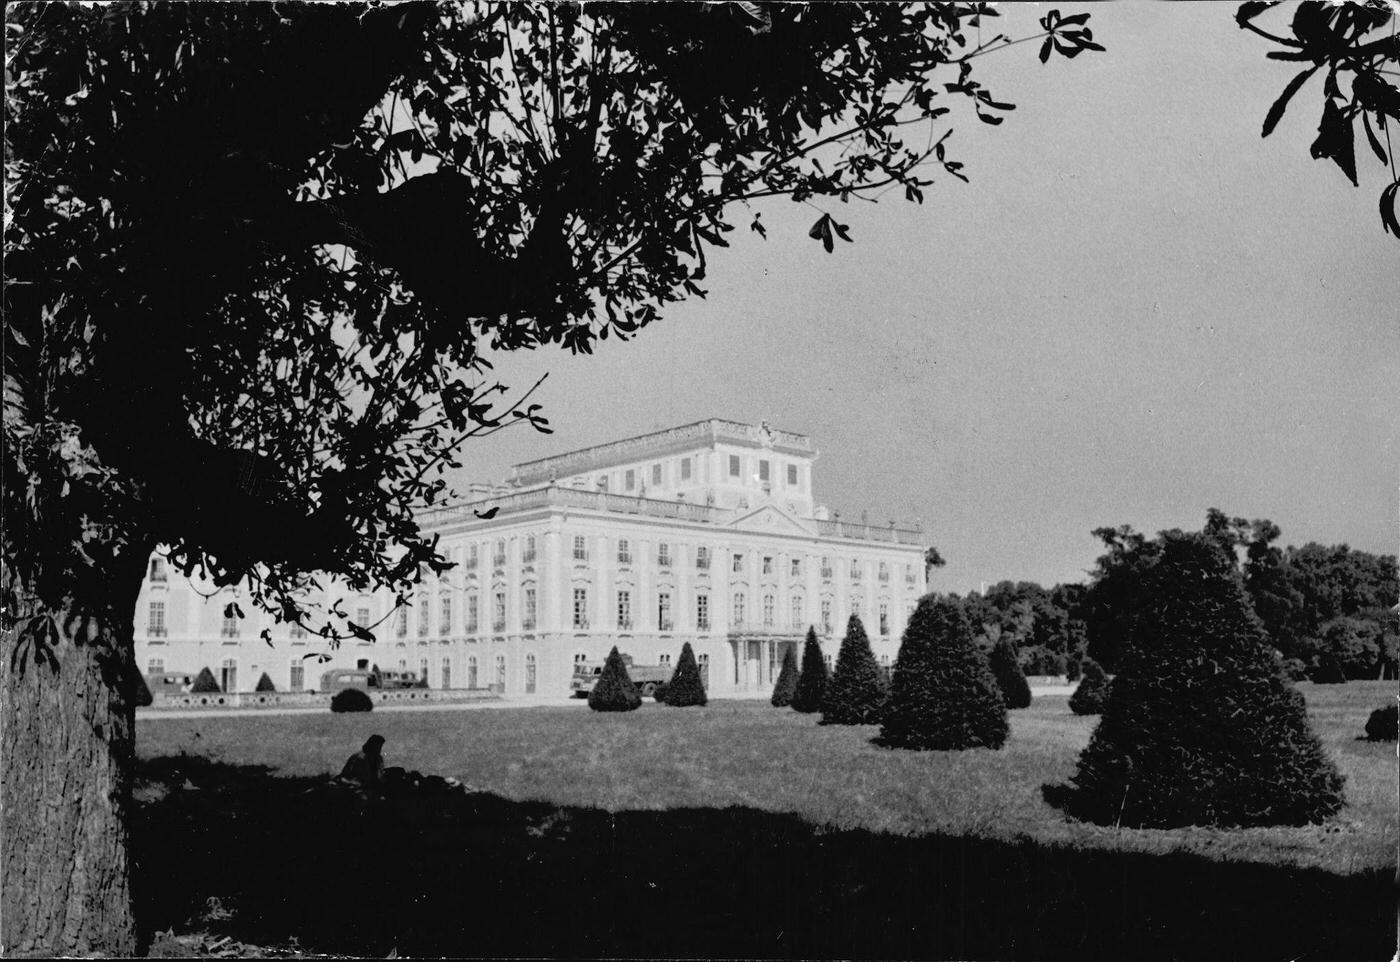 View of the country palace of the Esterhazy family, "Esterhaza," situated on the south side of Lake Neusiedler, east of Eisenstadt, near the Hungarian border, Austria,d 1950.